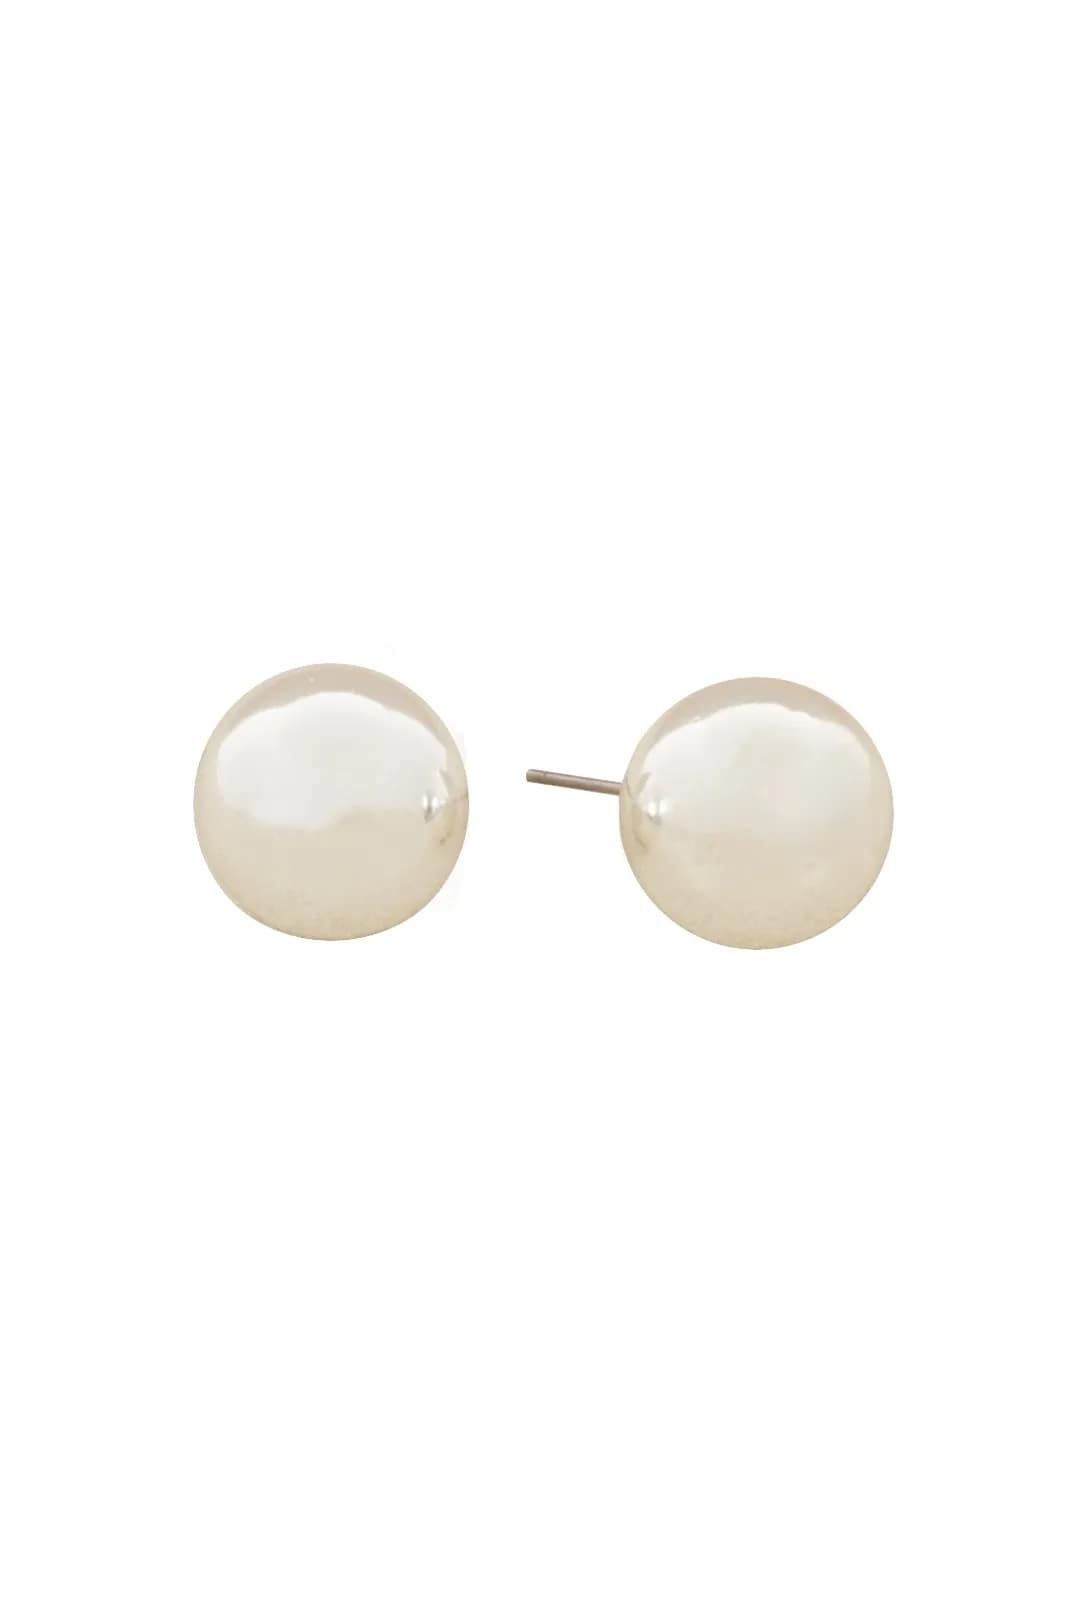 14mm Ball Stud Earring by Adorne, available for purchase